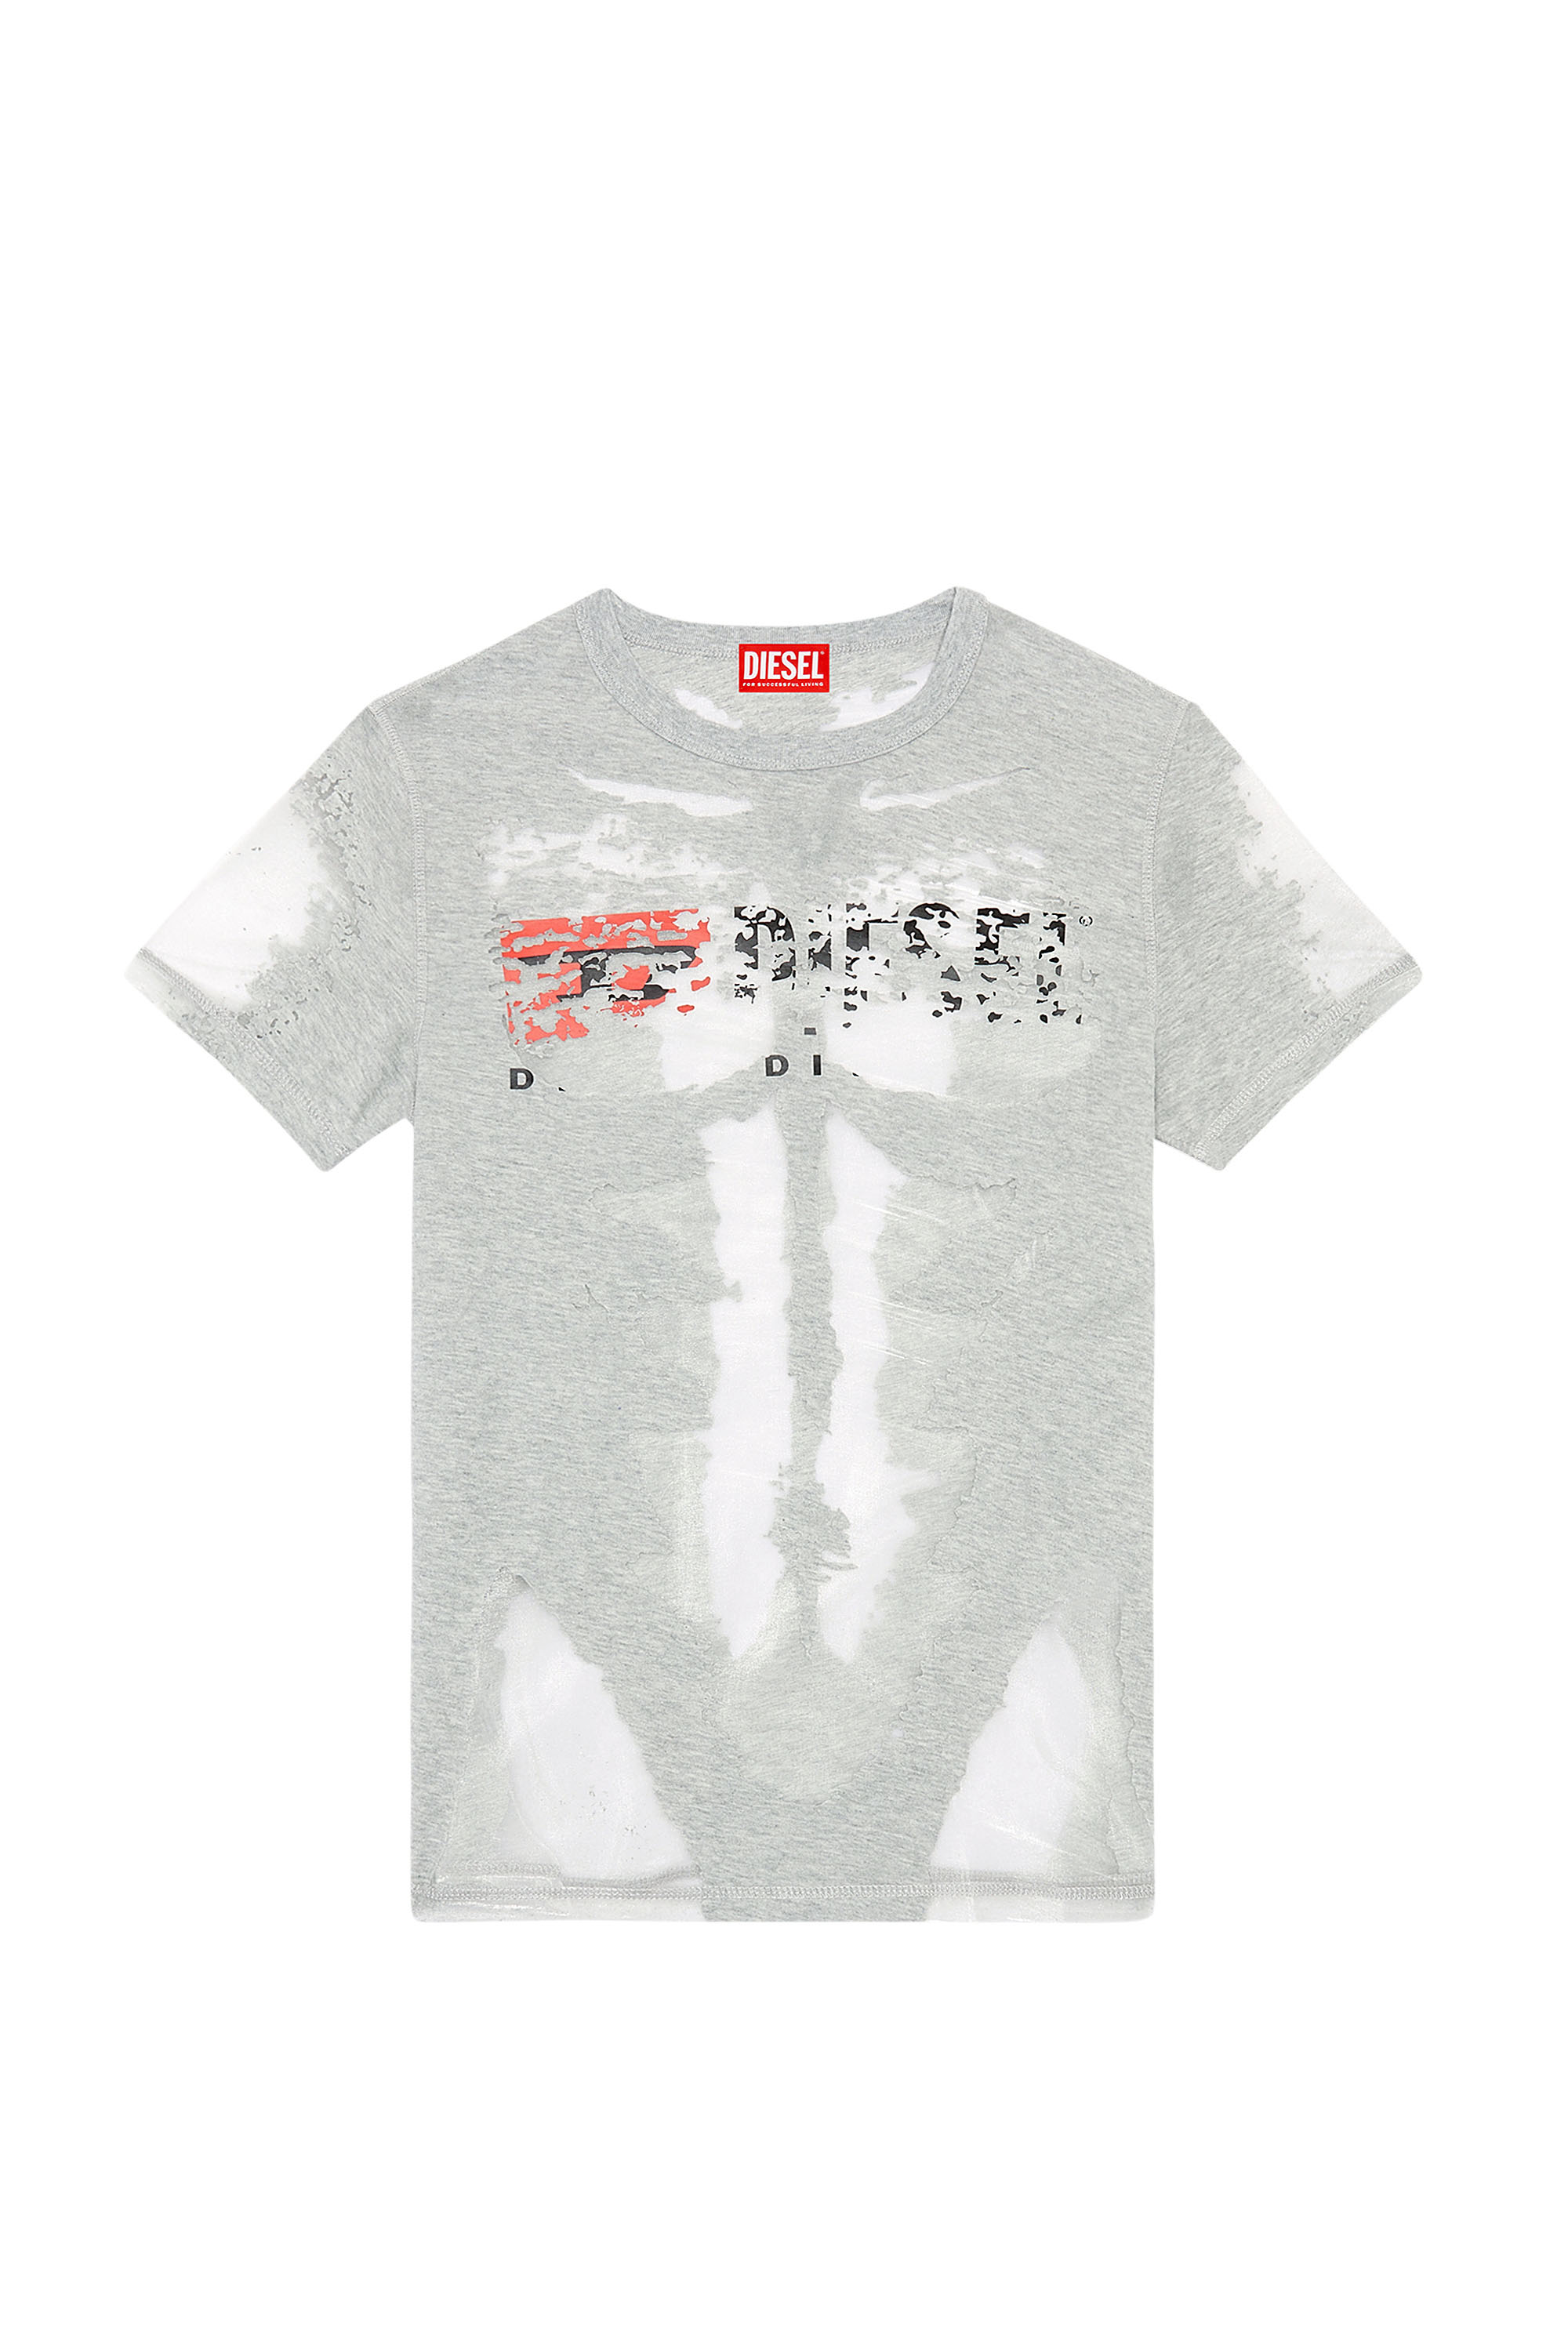 DIESEL Tシャツ XXL A029780CATM Relaxed グレー偽物なら返金します ...